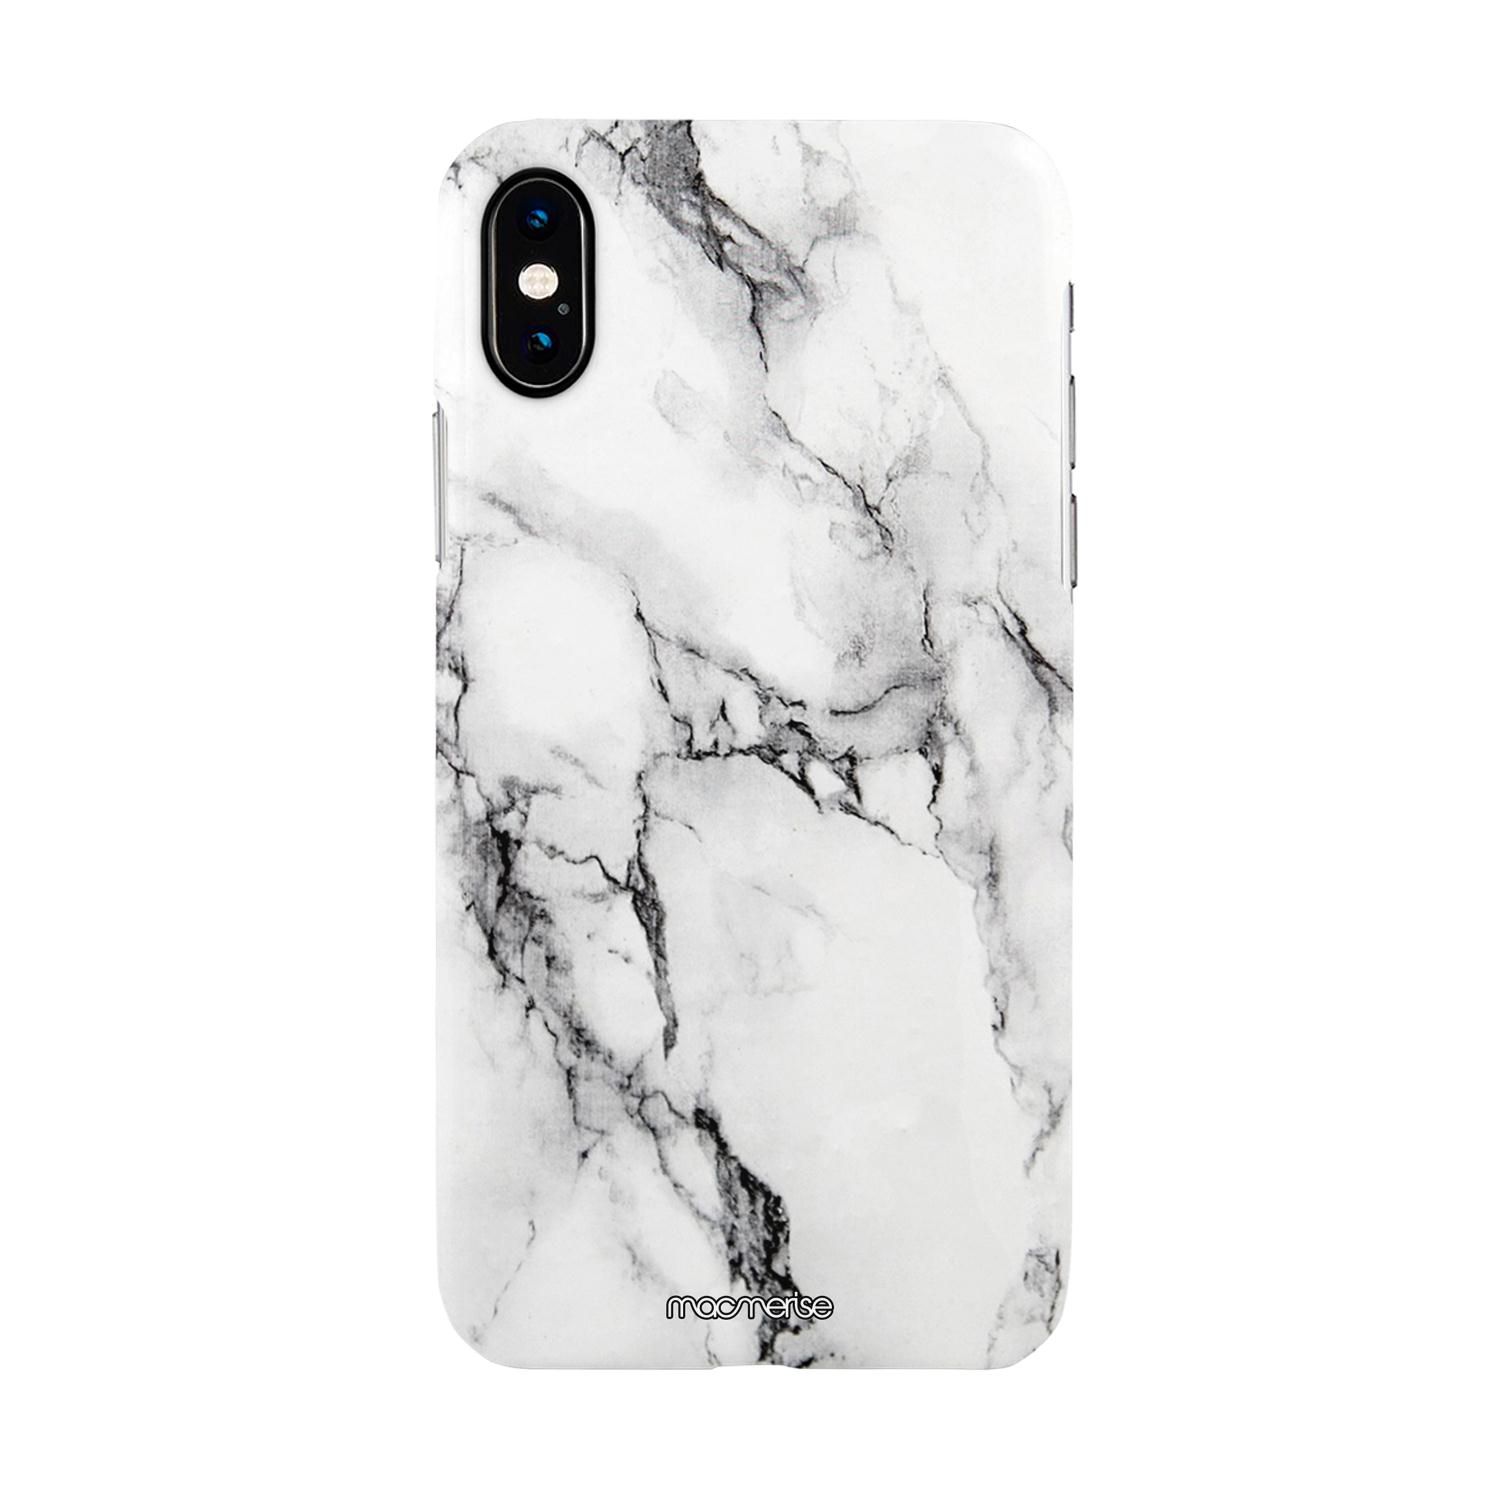 Buy CaseMate Waterfall Hard Back Case Cover for Apple iPhone XS Max Online   Tata CLiQ